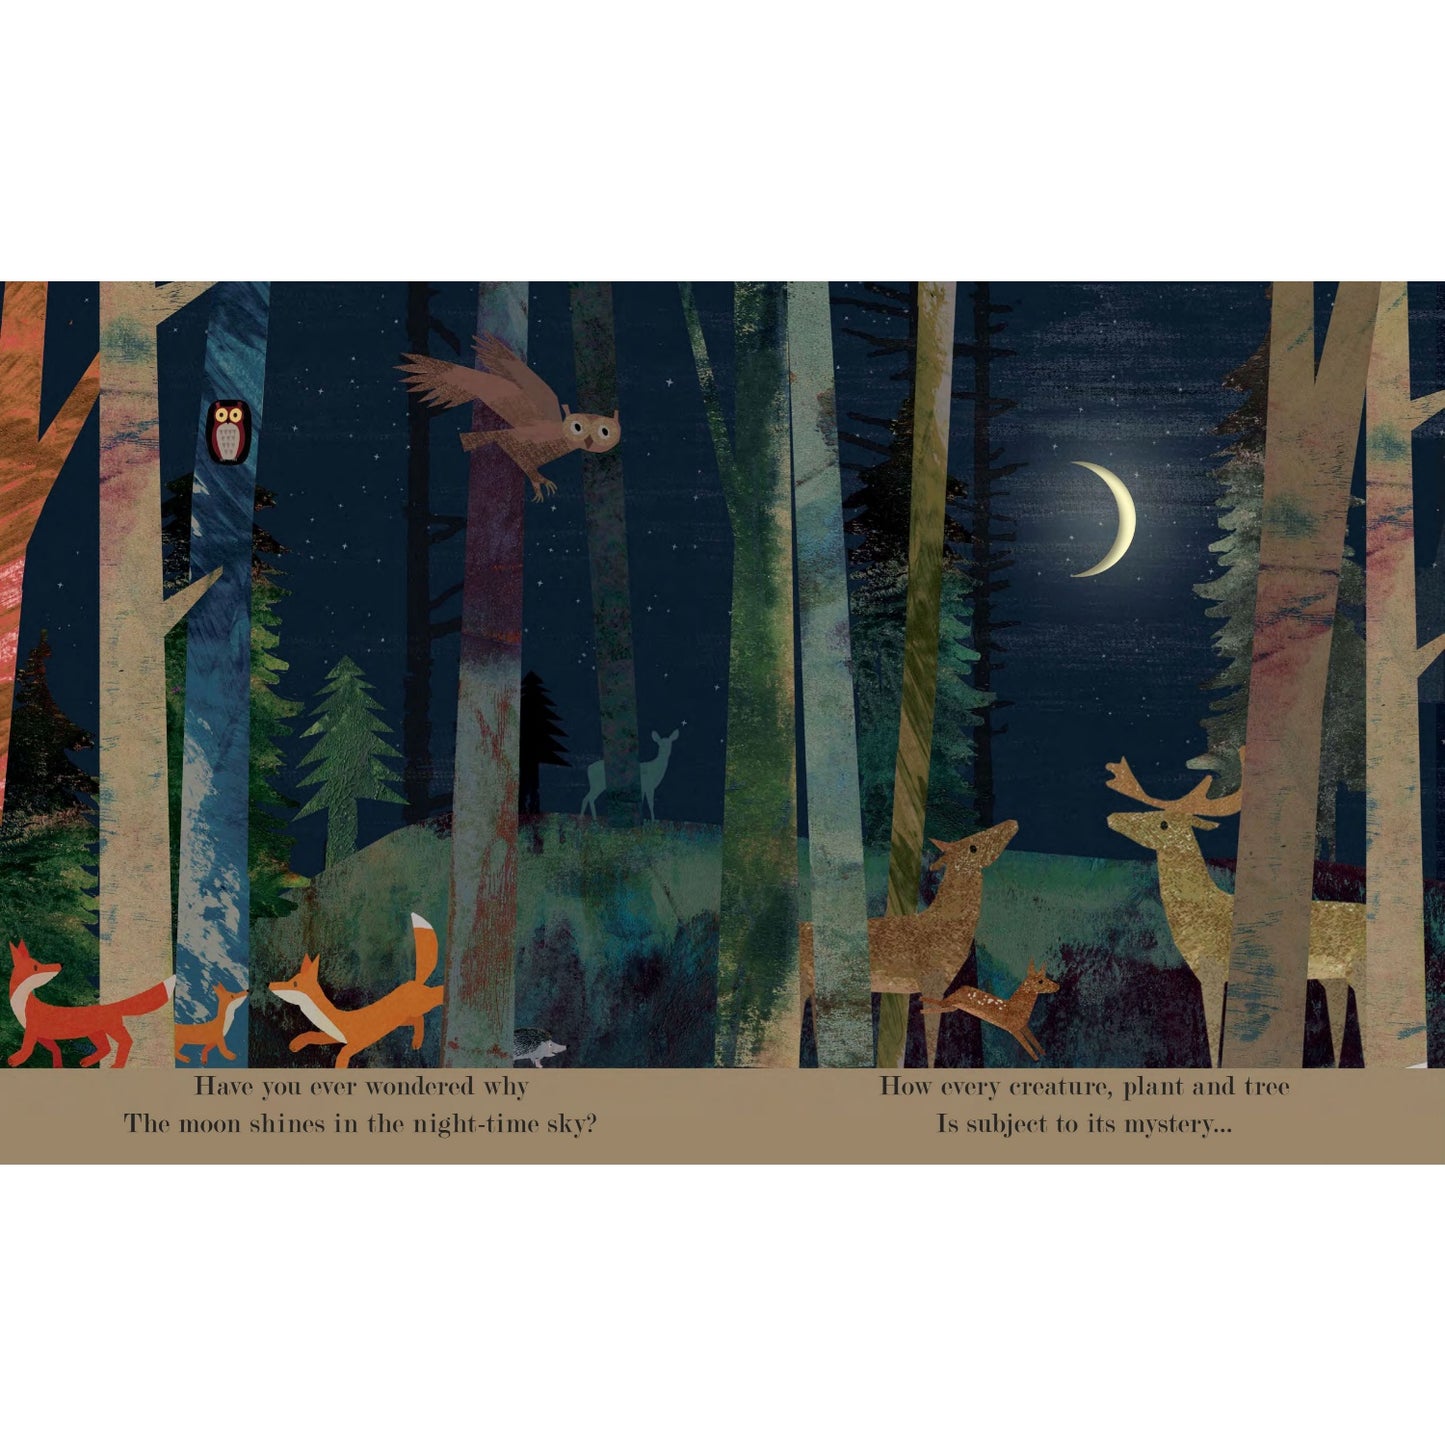 Moon: Night-Time Around The World | Children’s Board Book on Nature